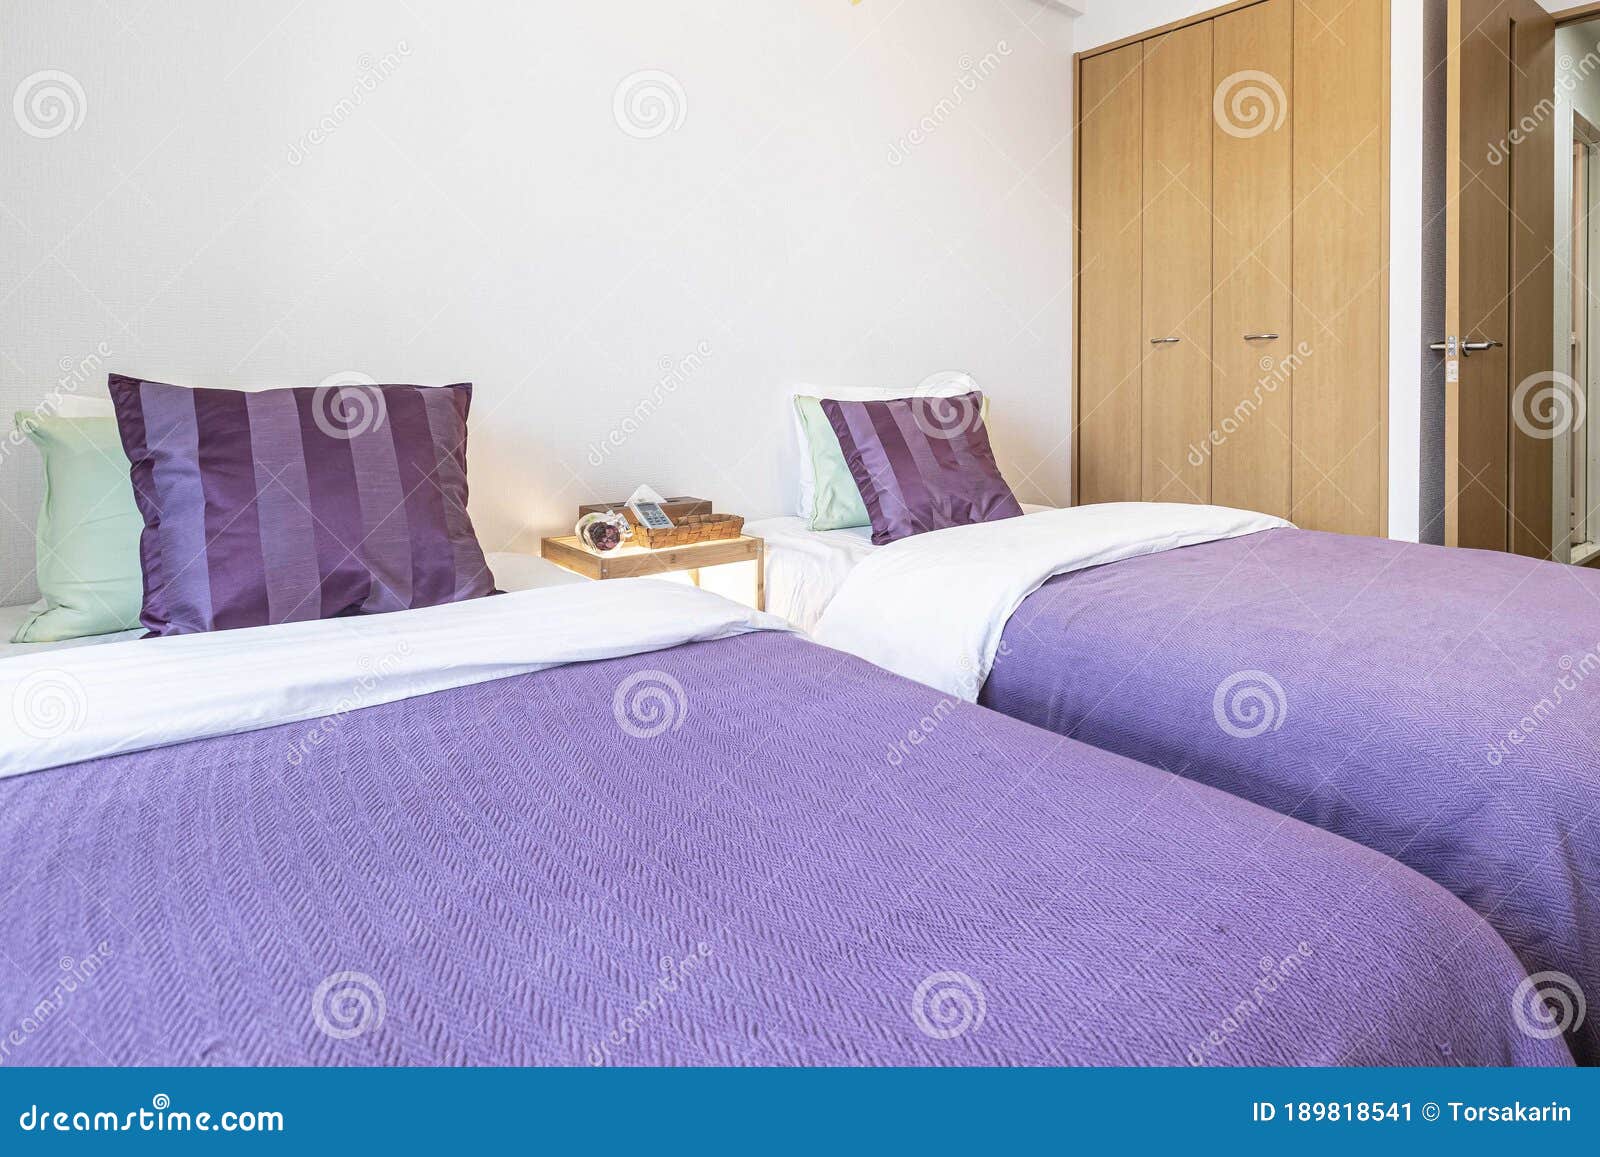 Twin Bed And Blanket In A Small Bedroom Stock Image Image Of Cushions